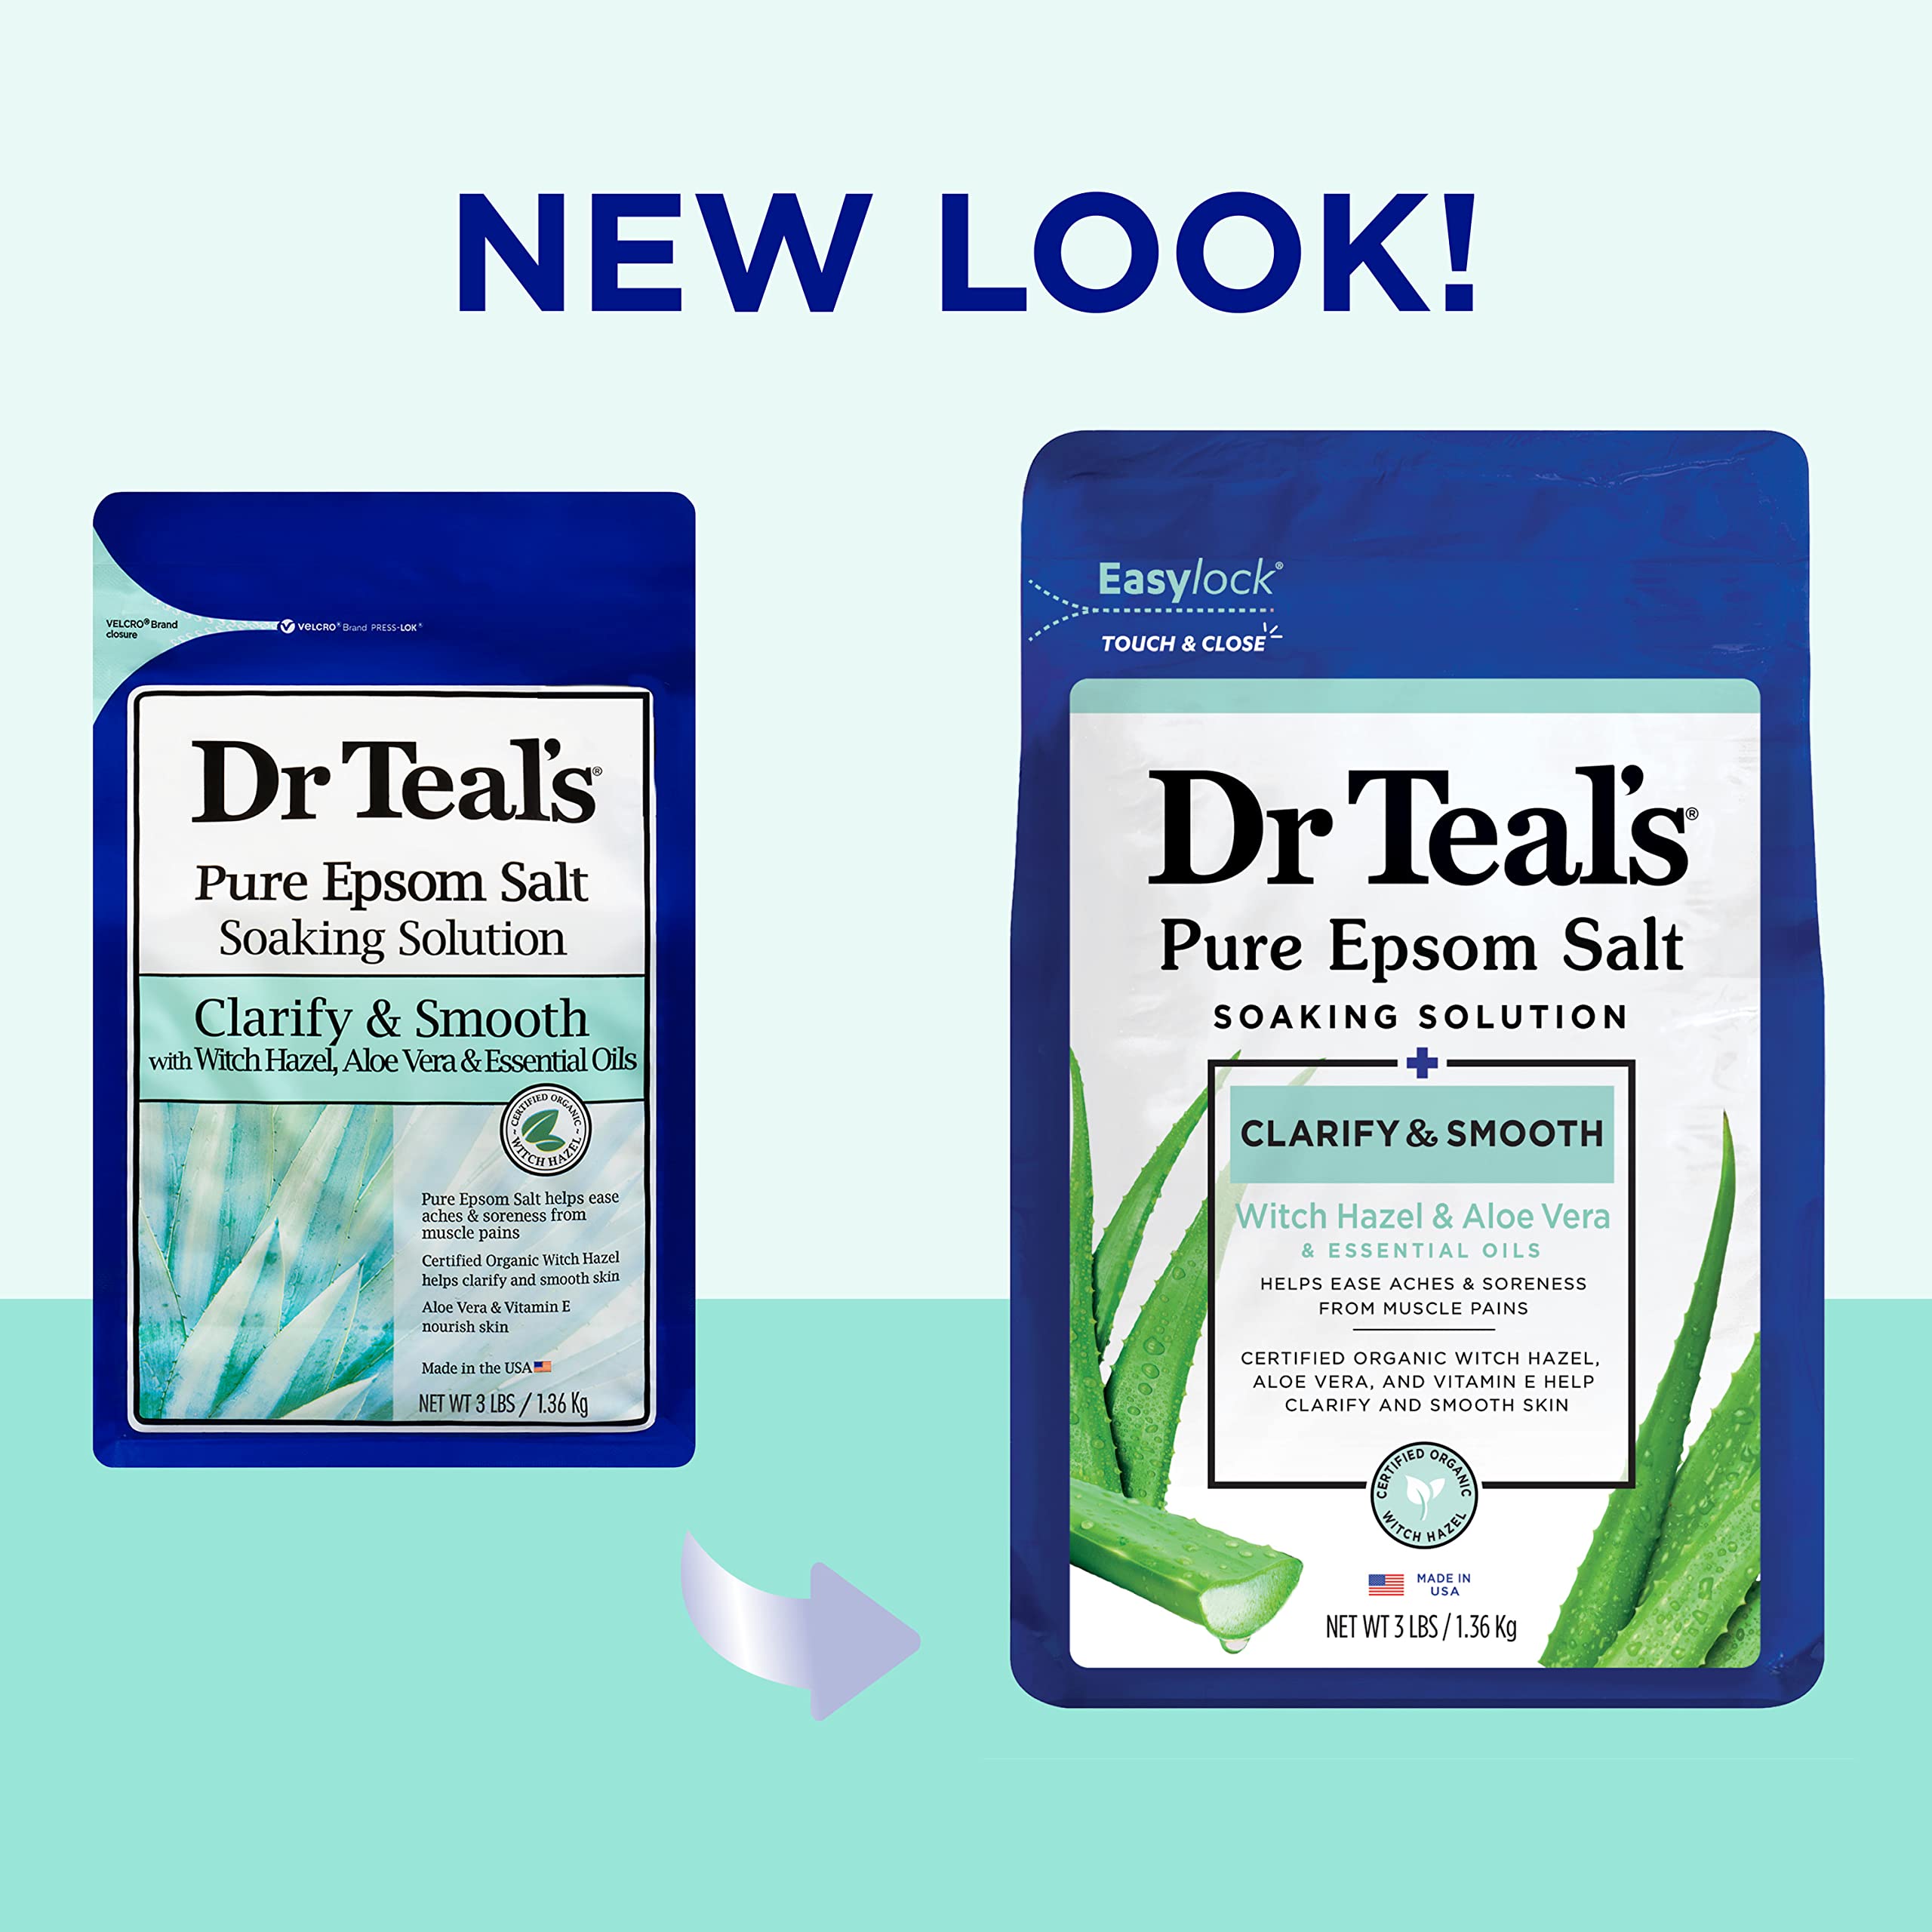 Dr Teal's Pure Epsom Salt, Clarify & Smooth with Witch Hazel & Aloe Vera, 3lbs (Packaging May Vary)